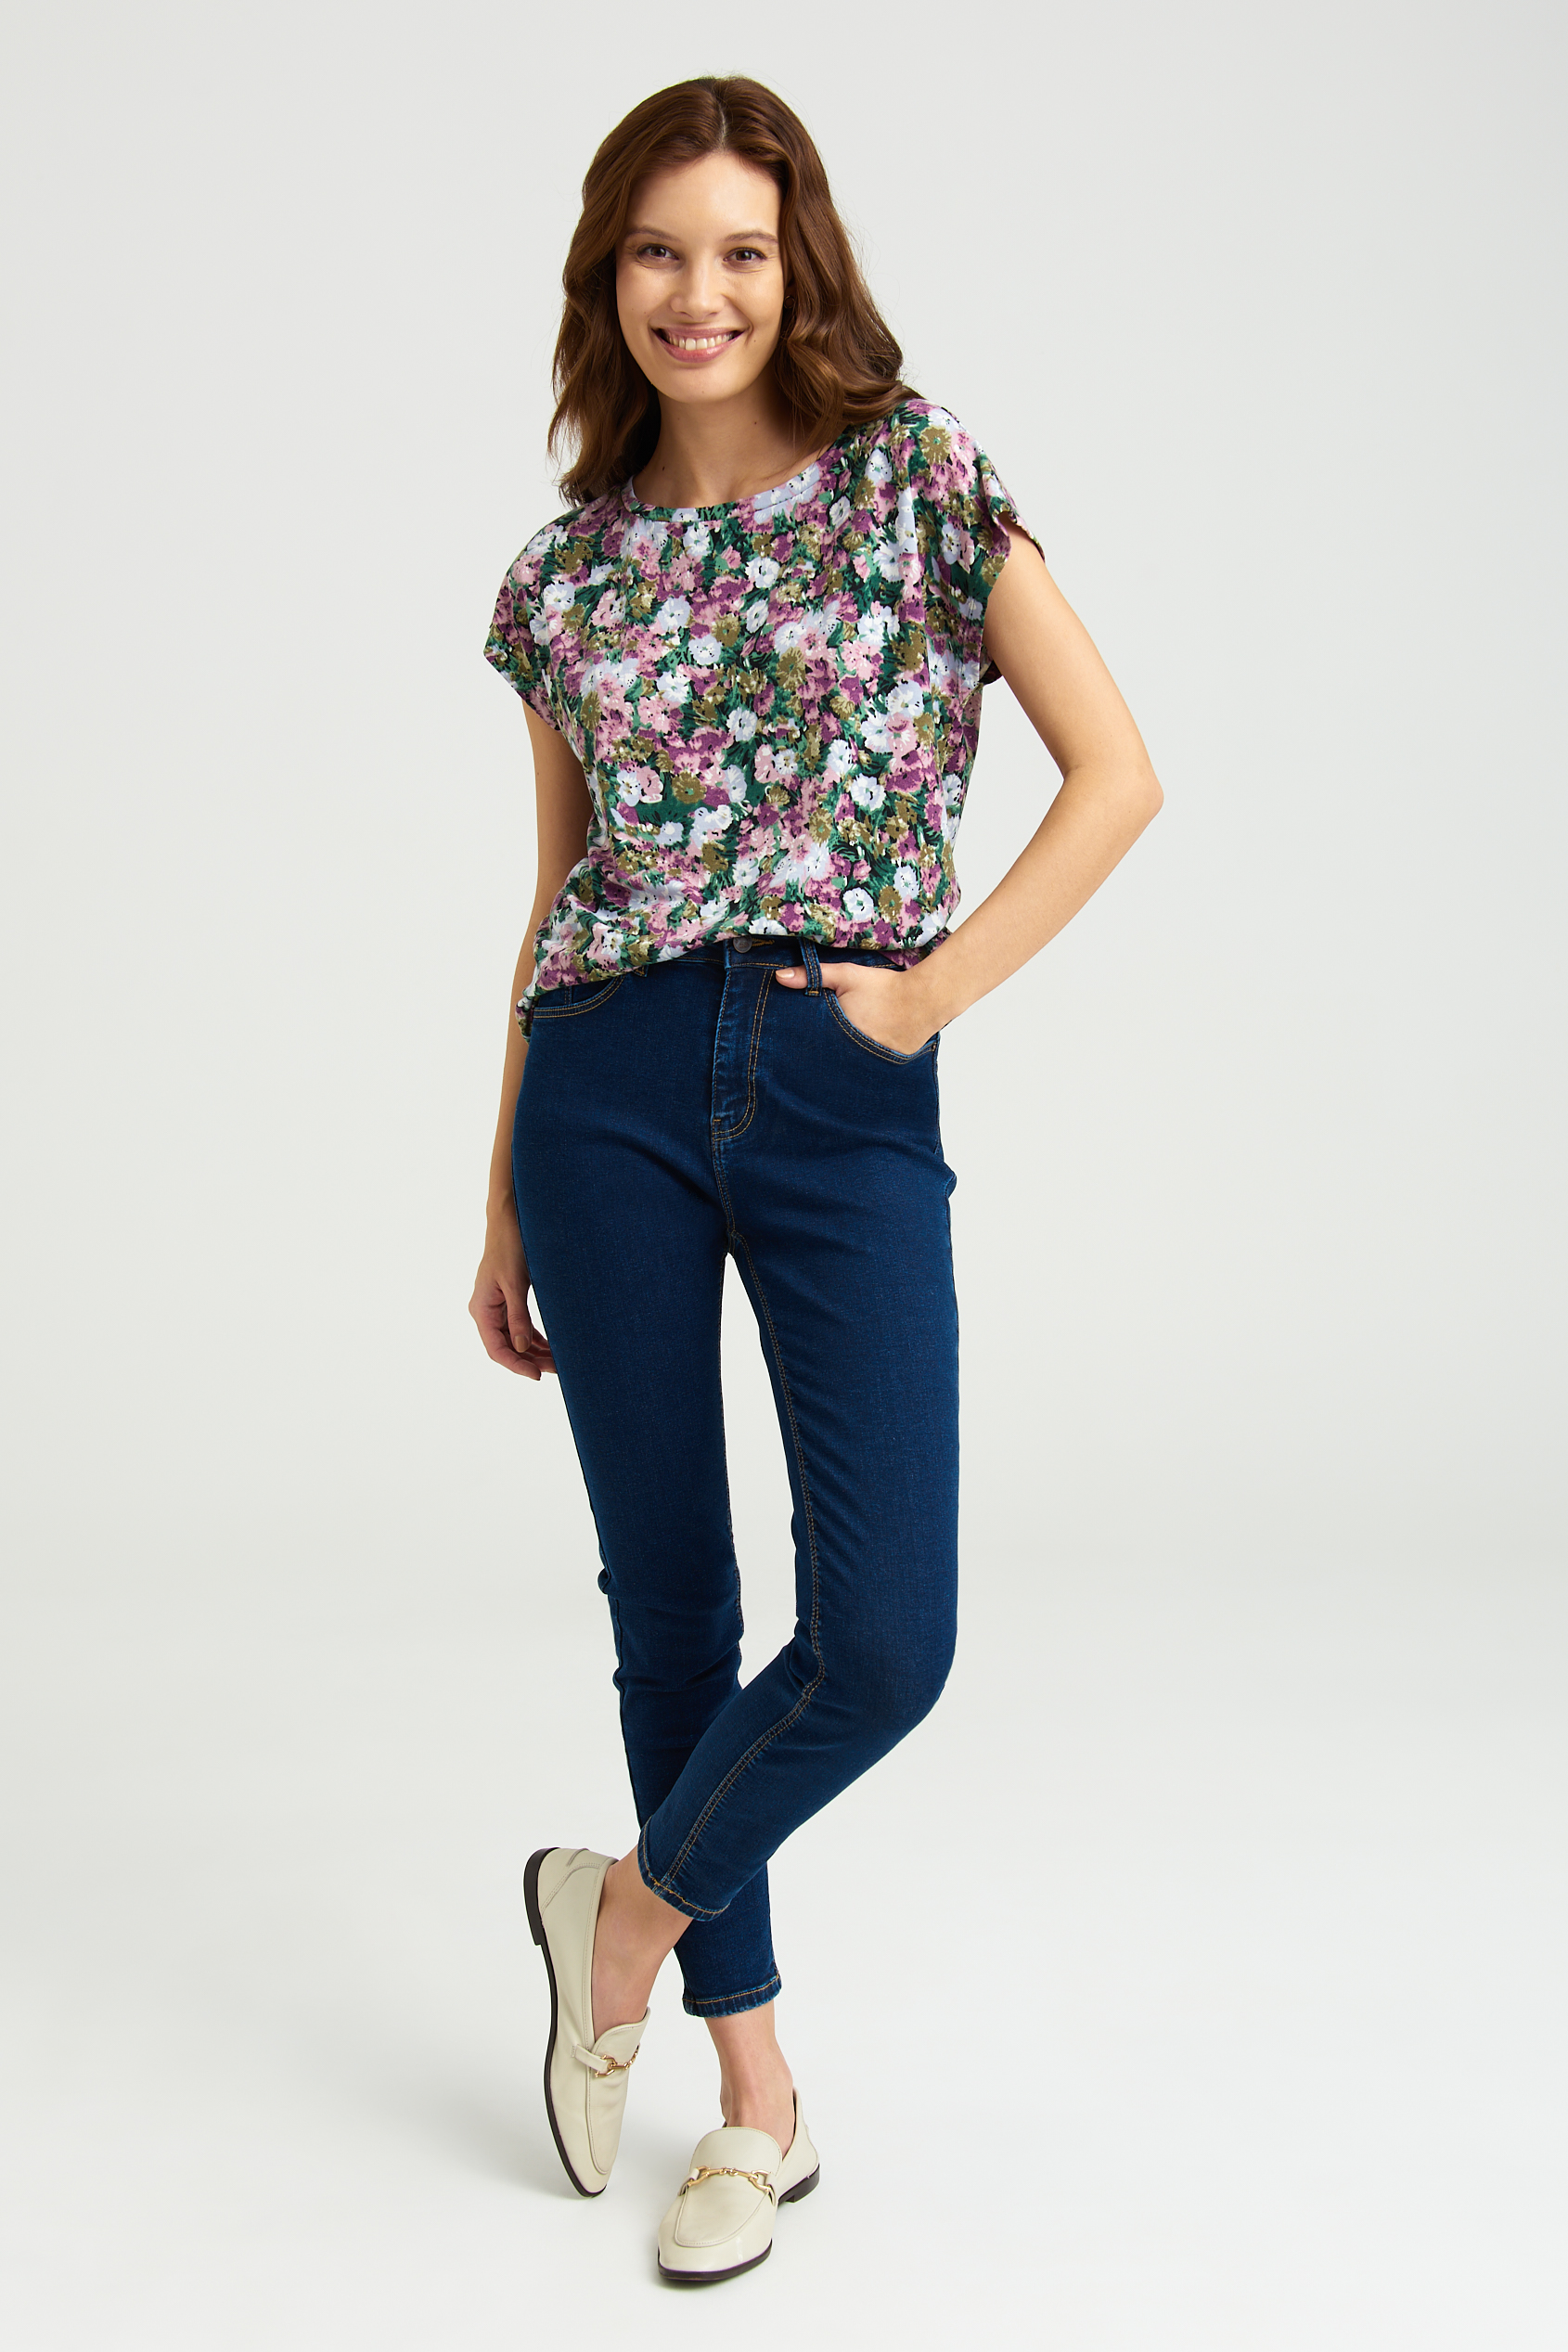 Greenpoint Woman's Blouse TOP7220001